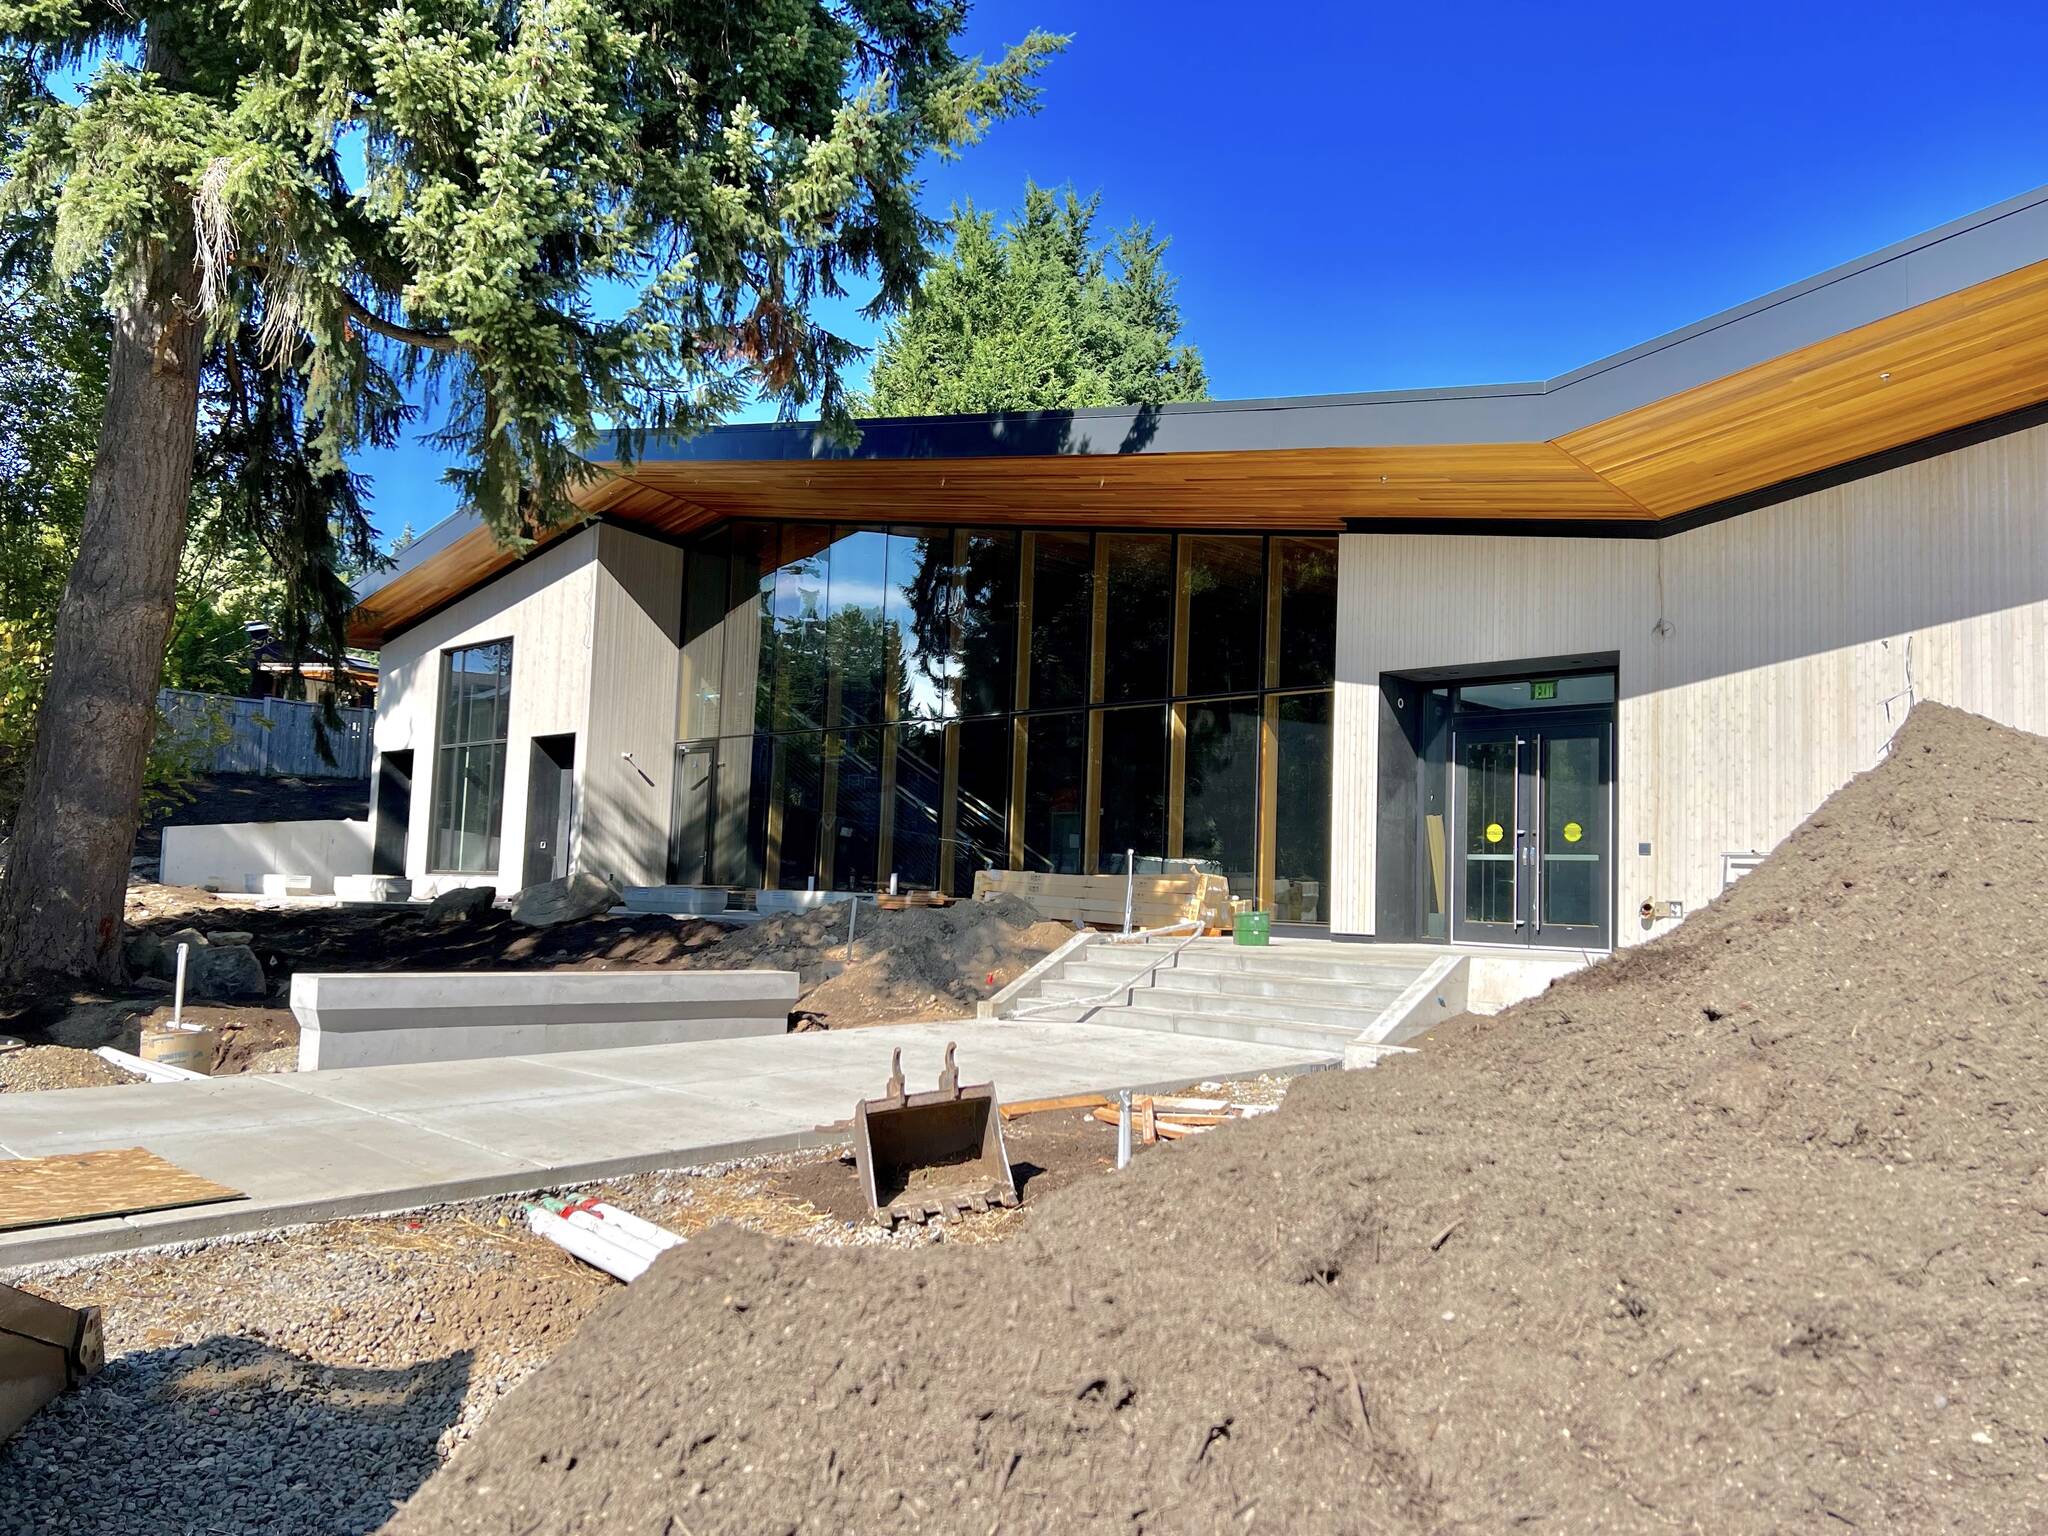 Nancy Treder/Kitsap News Group
The Buxton Center is in the final stages of construction and is expected to be completed by the end of the month. Shows in the new facility will begin in October.